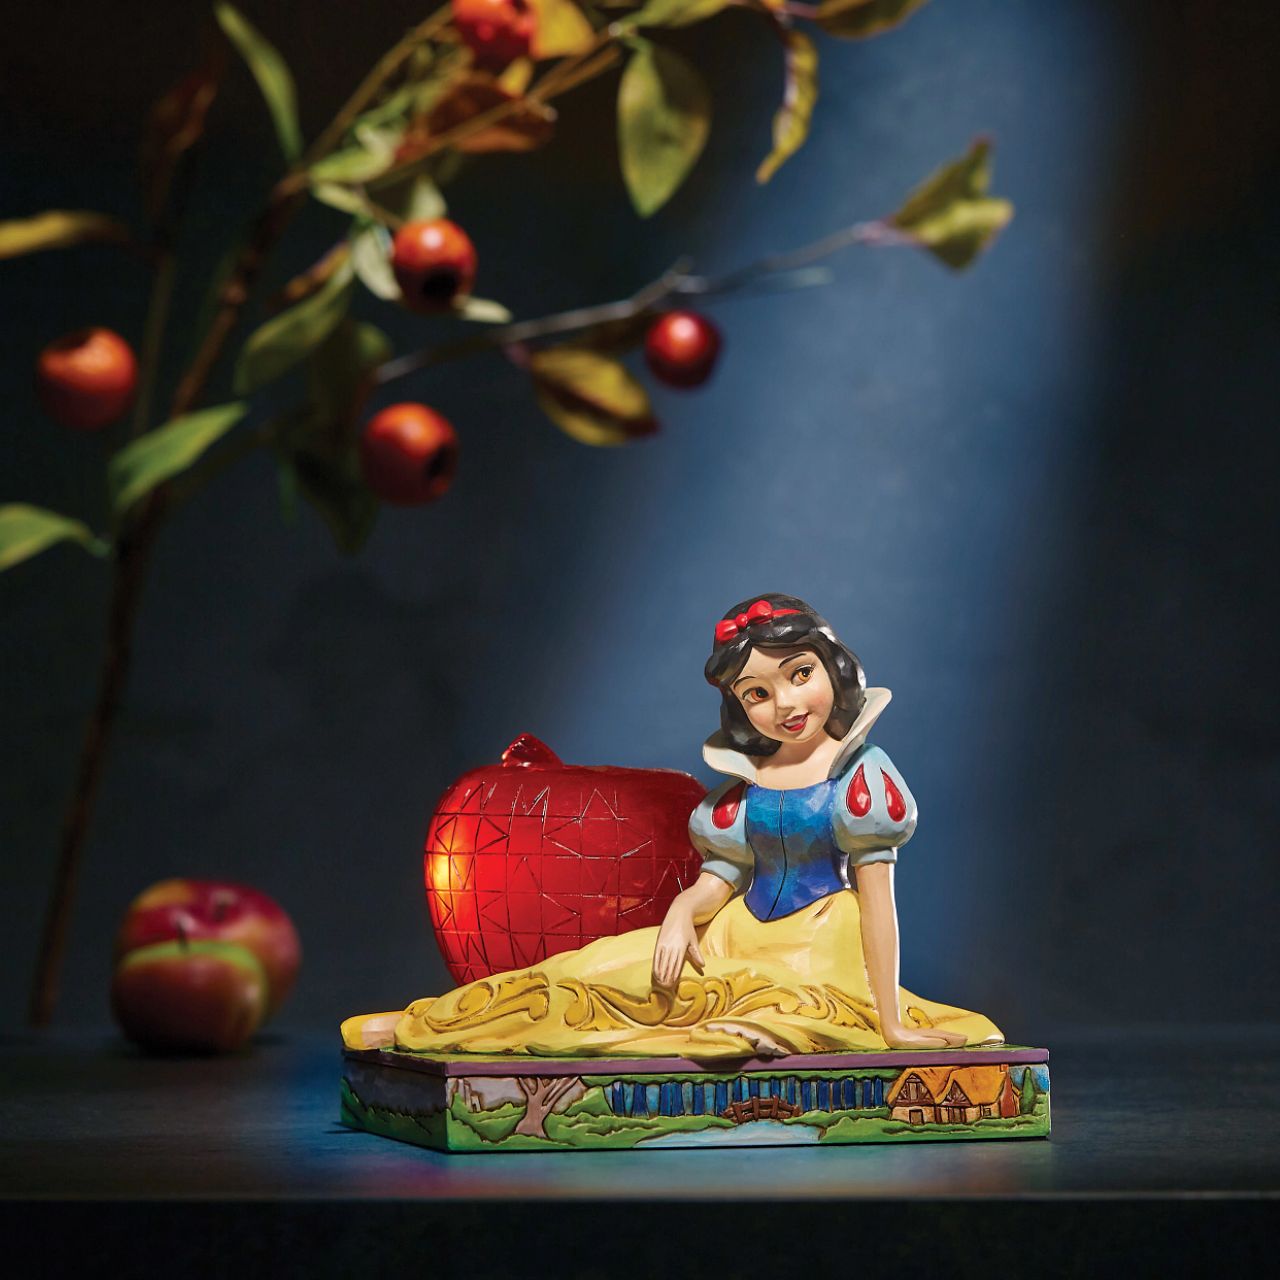 Jim Shore Disney Snow White with Apple Figurine  This Disney Traditions line by Jim Shore features iconic Walt Disney princesses with their famous props. With a base illustrating her story, this piece features Snow White in her famous gown next to a large apple. Packaged in a branded gift box.